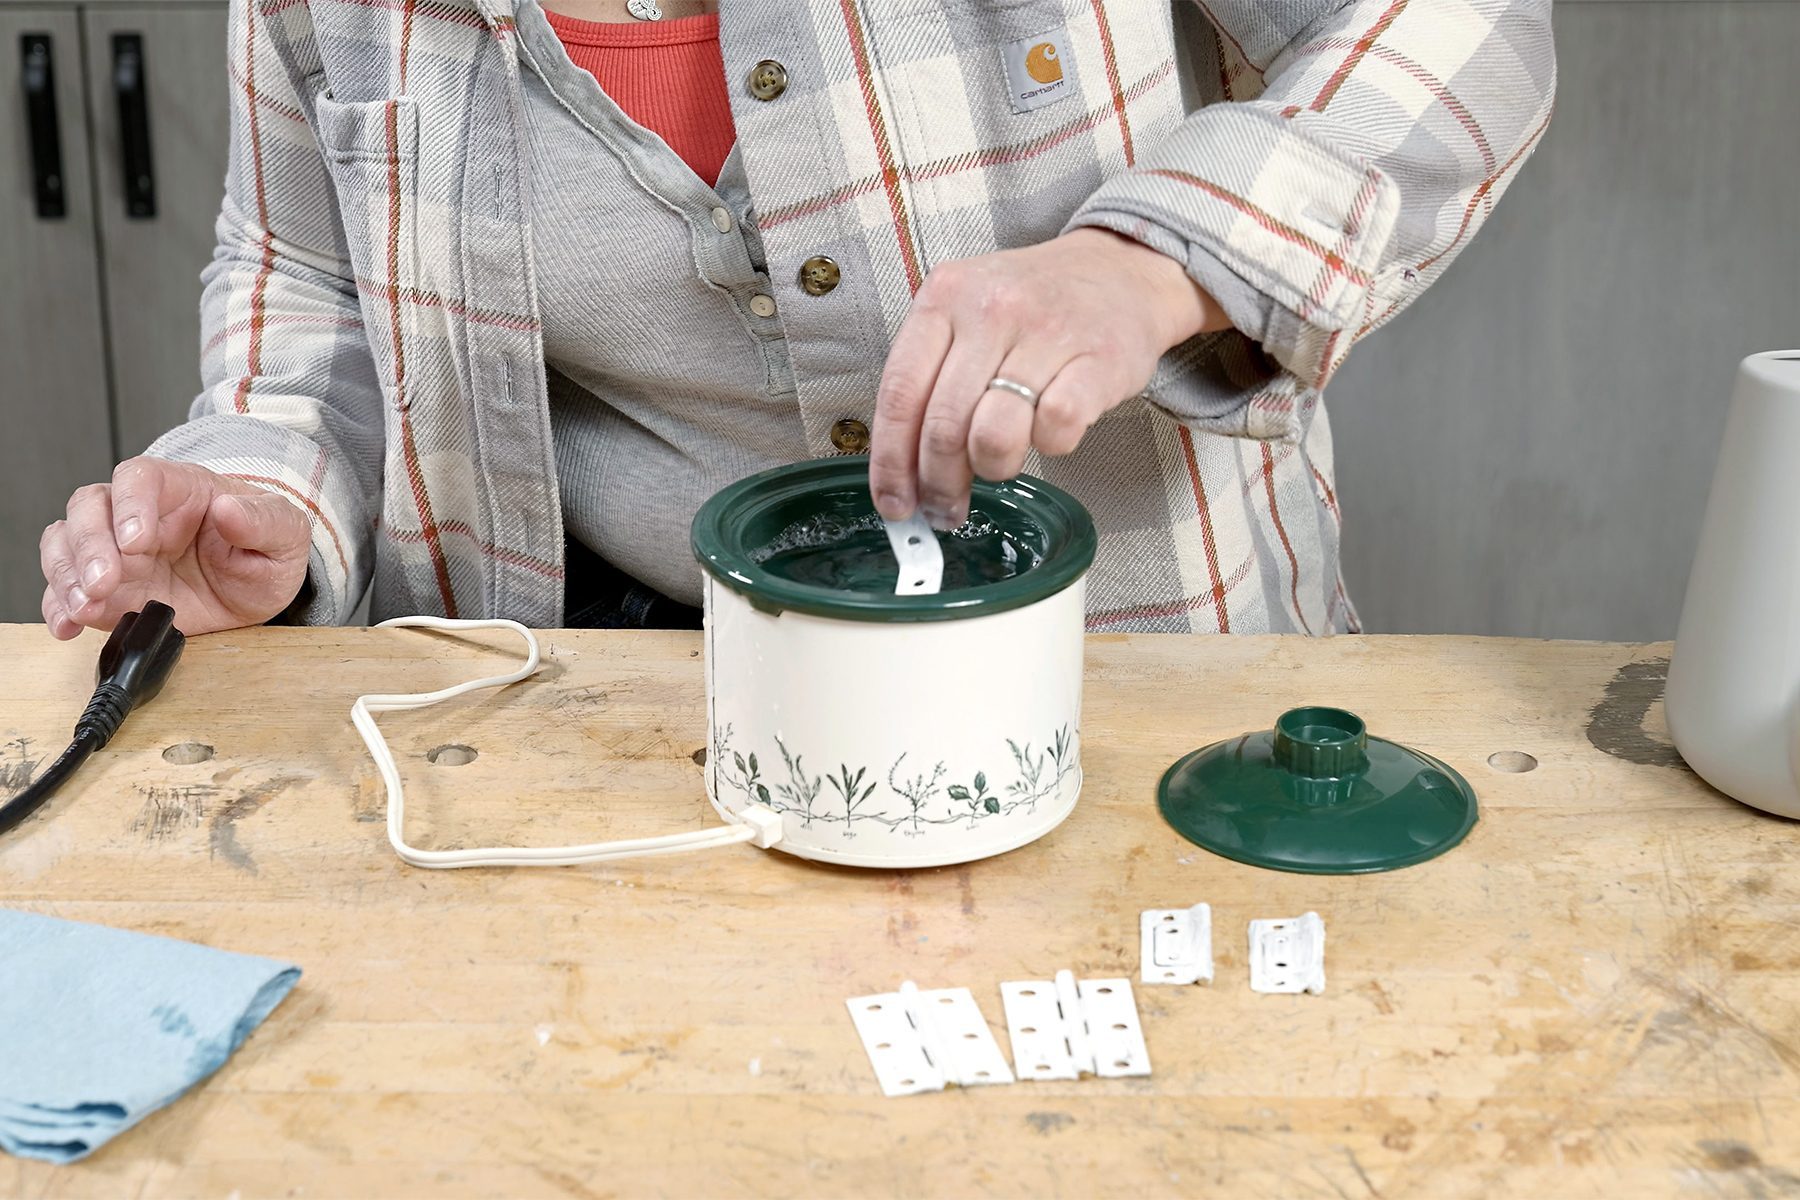 Person in a plaid shirt testing white strips in the green and white pot of a wax warmer on a wooden table, with spare strips and a lid beside the warmer.